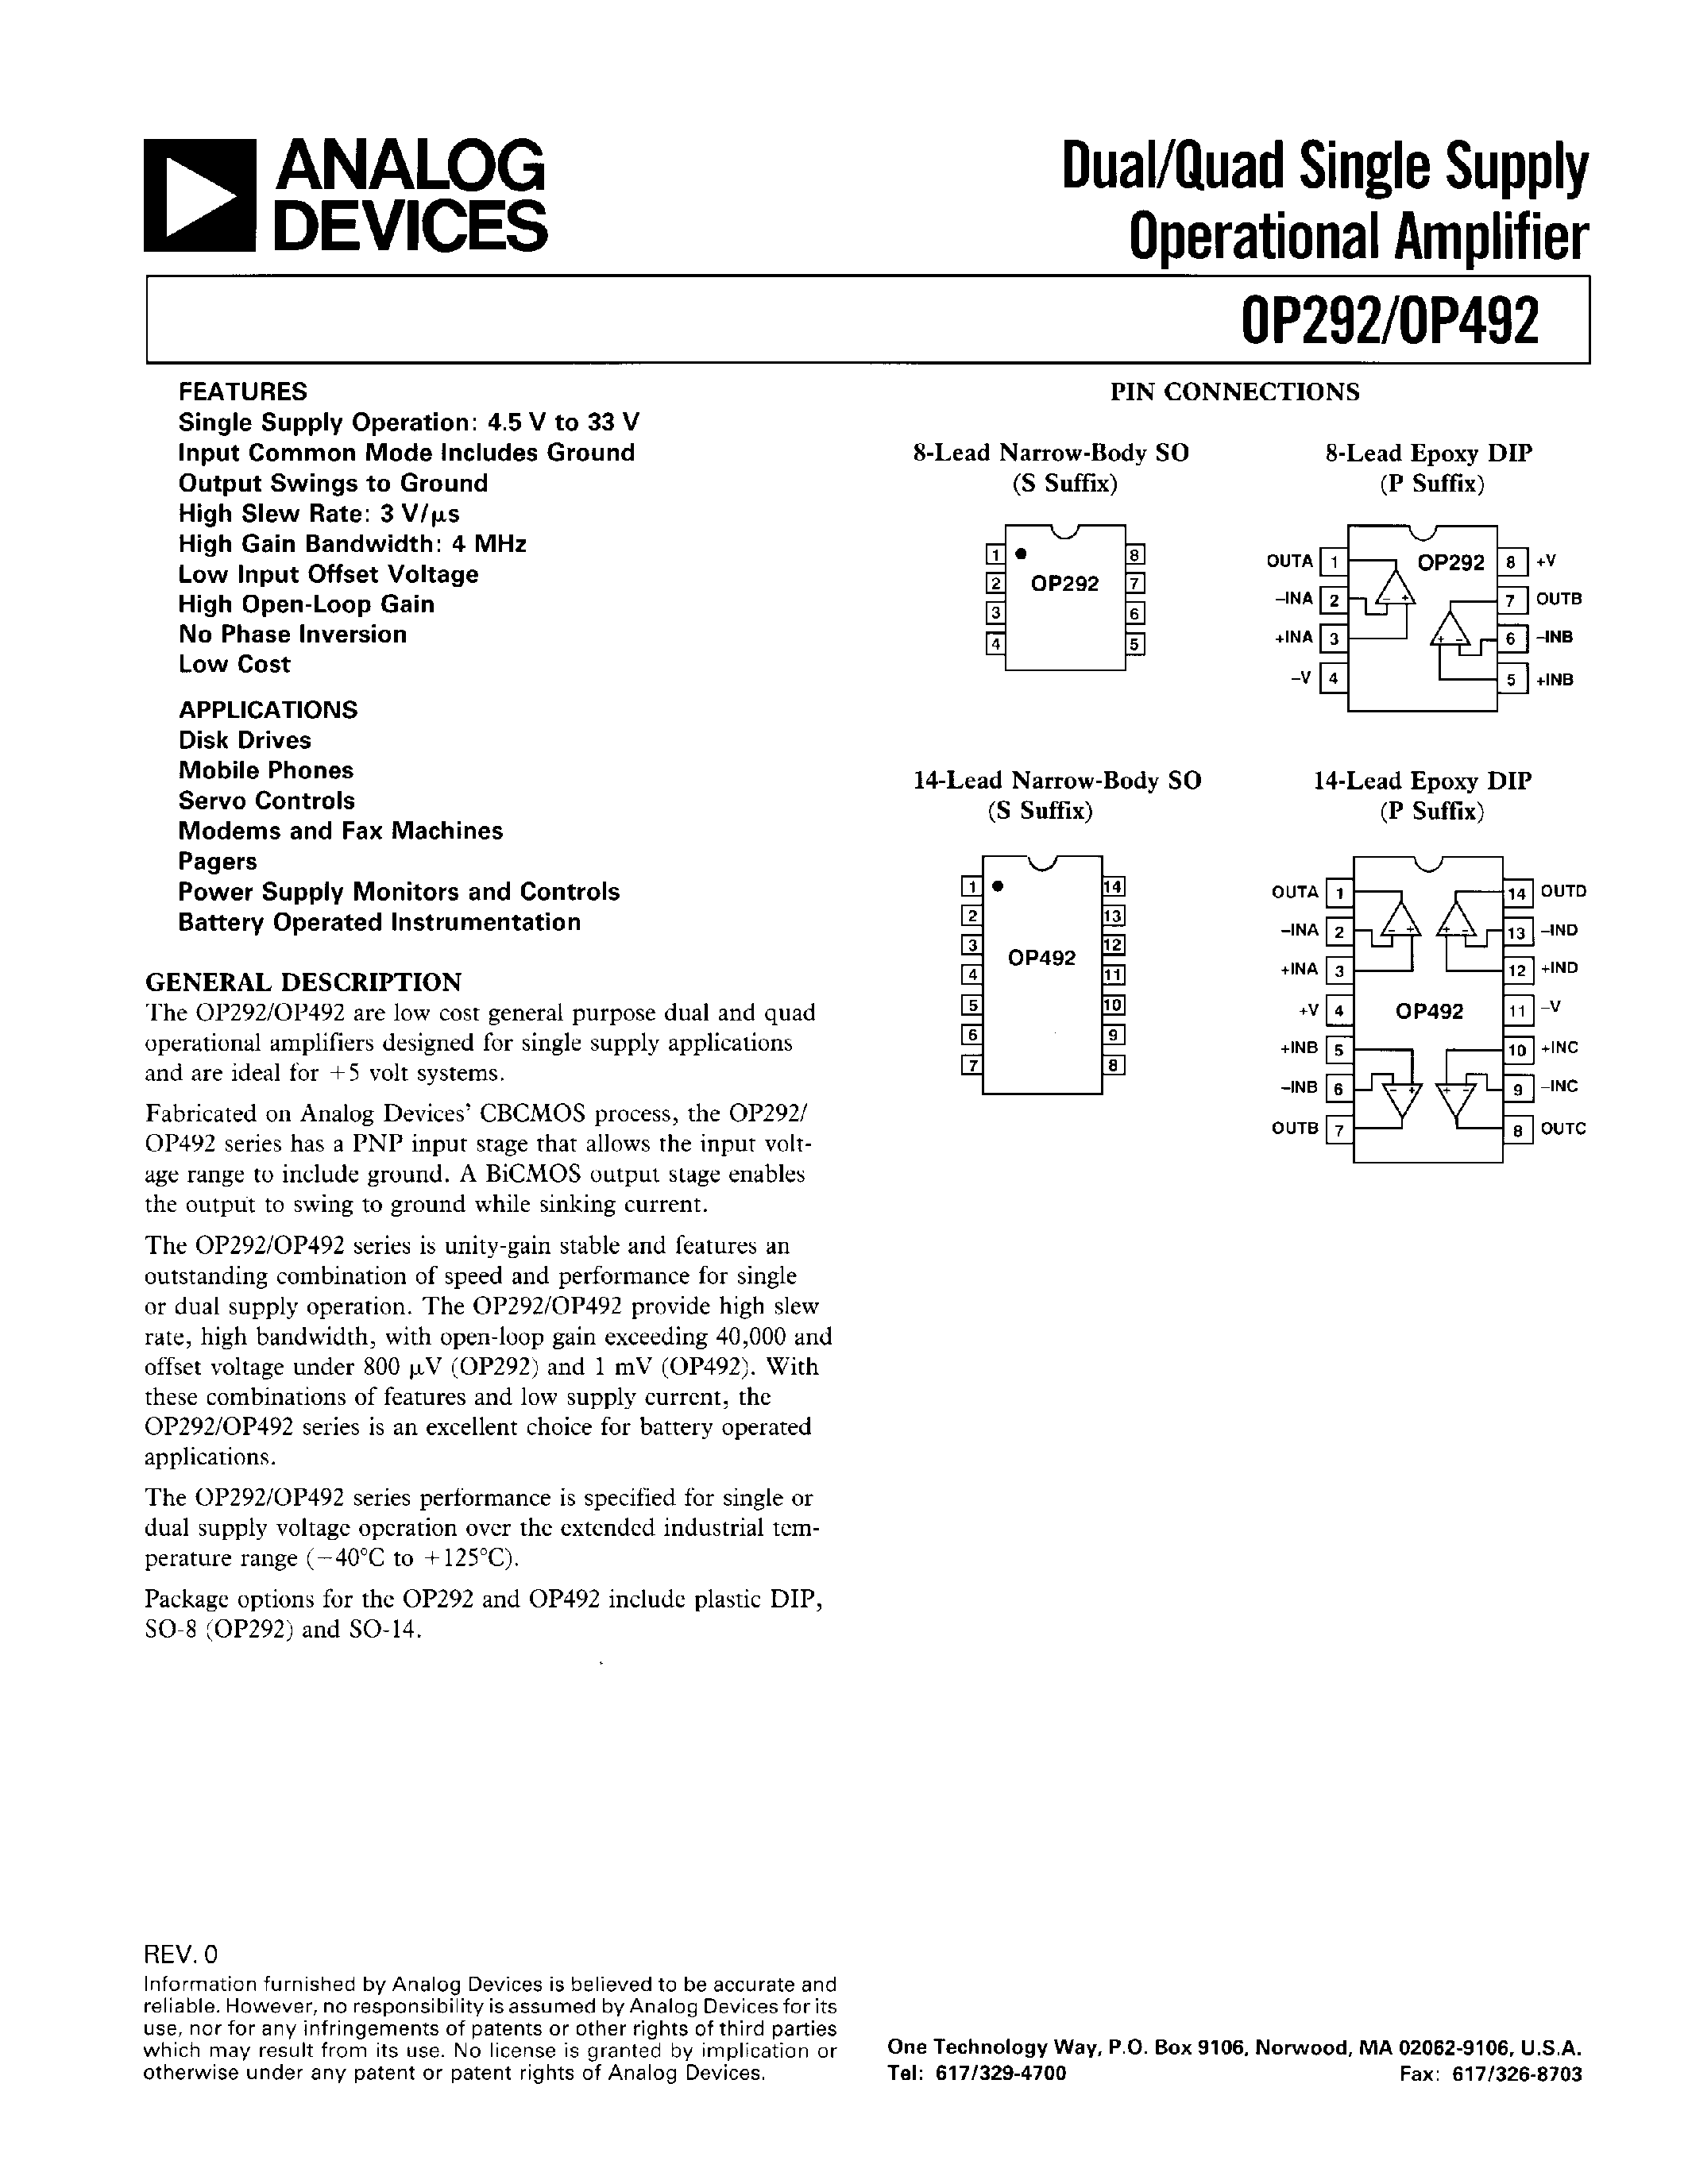 Datasheet OP292 - DUAL/QUAD SINGLE SUPPLY OPERATIONAL AMPLIFIER page 1